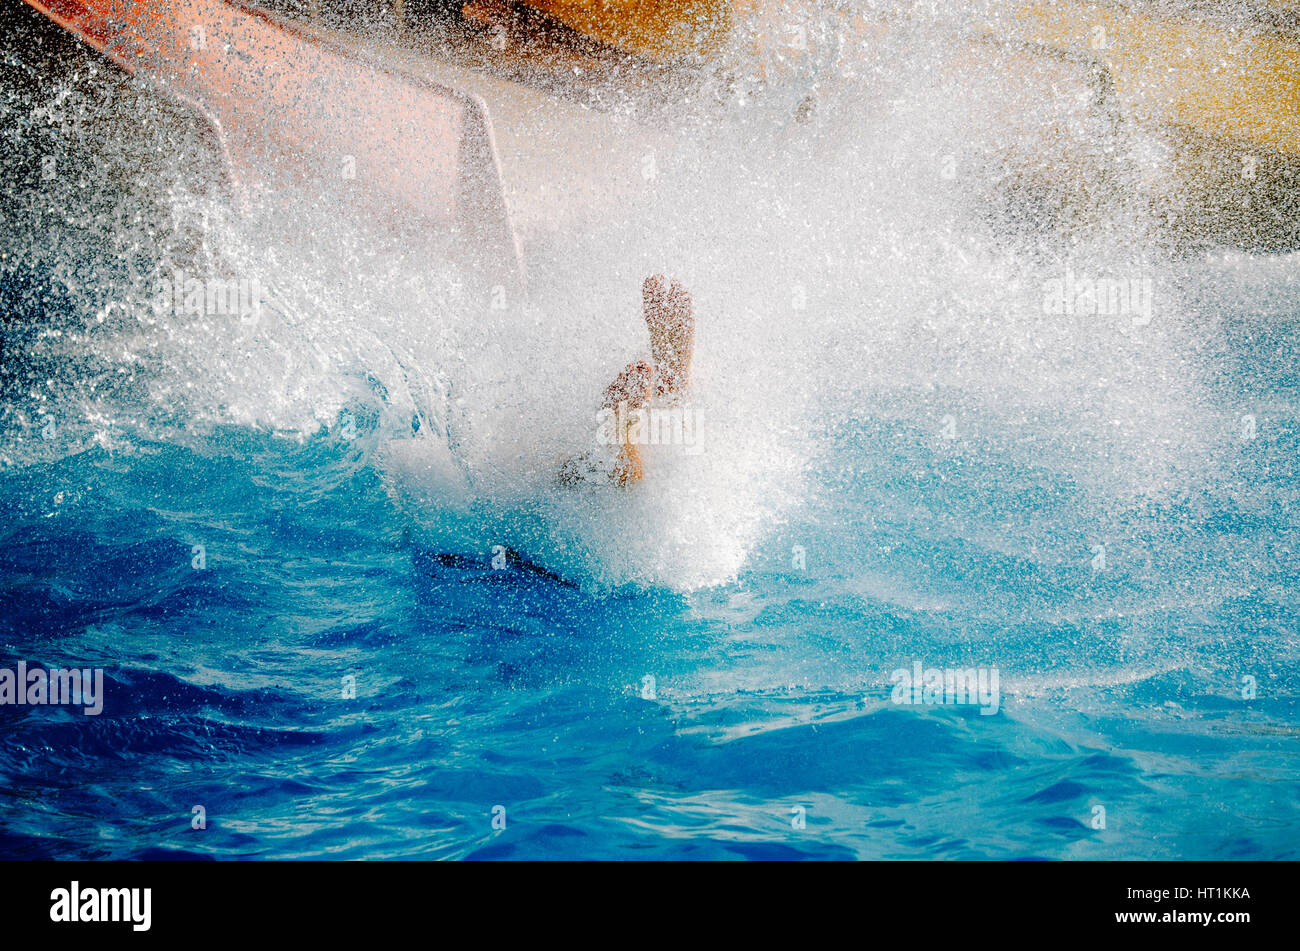 Caucasian adult falls into pool after going down water slide. Many water sprays, only the feet are visible. Summer vacation with water park concept. Stock Photo